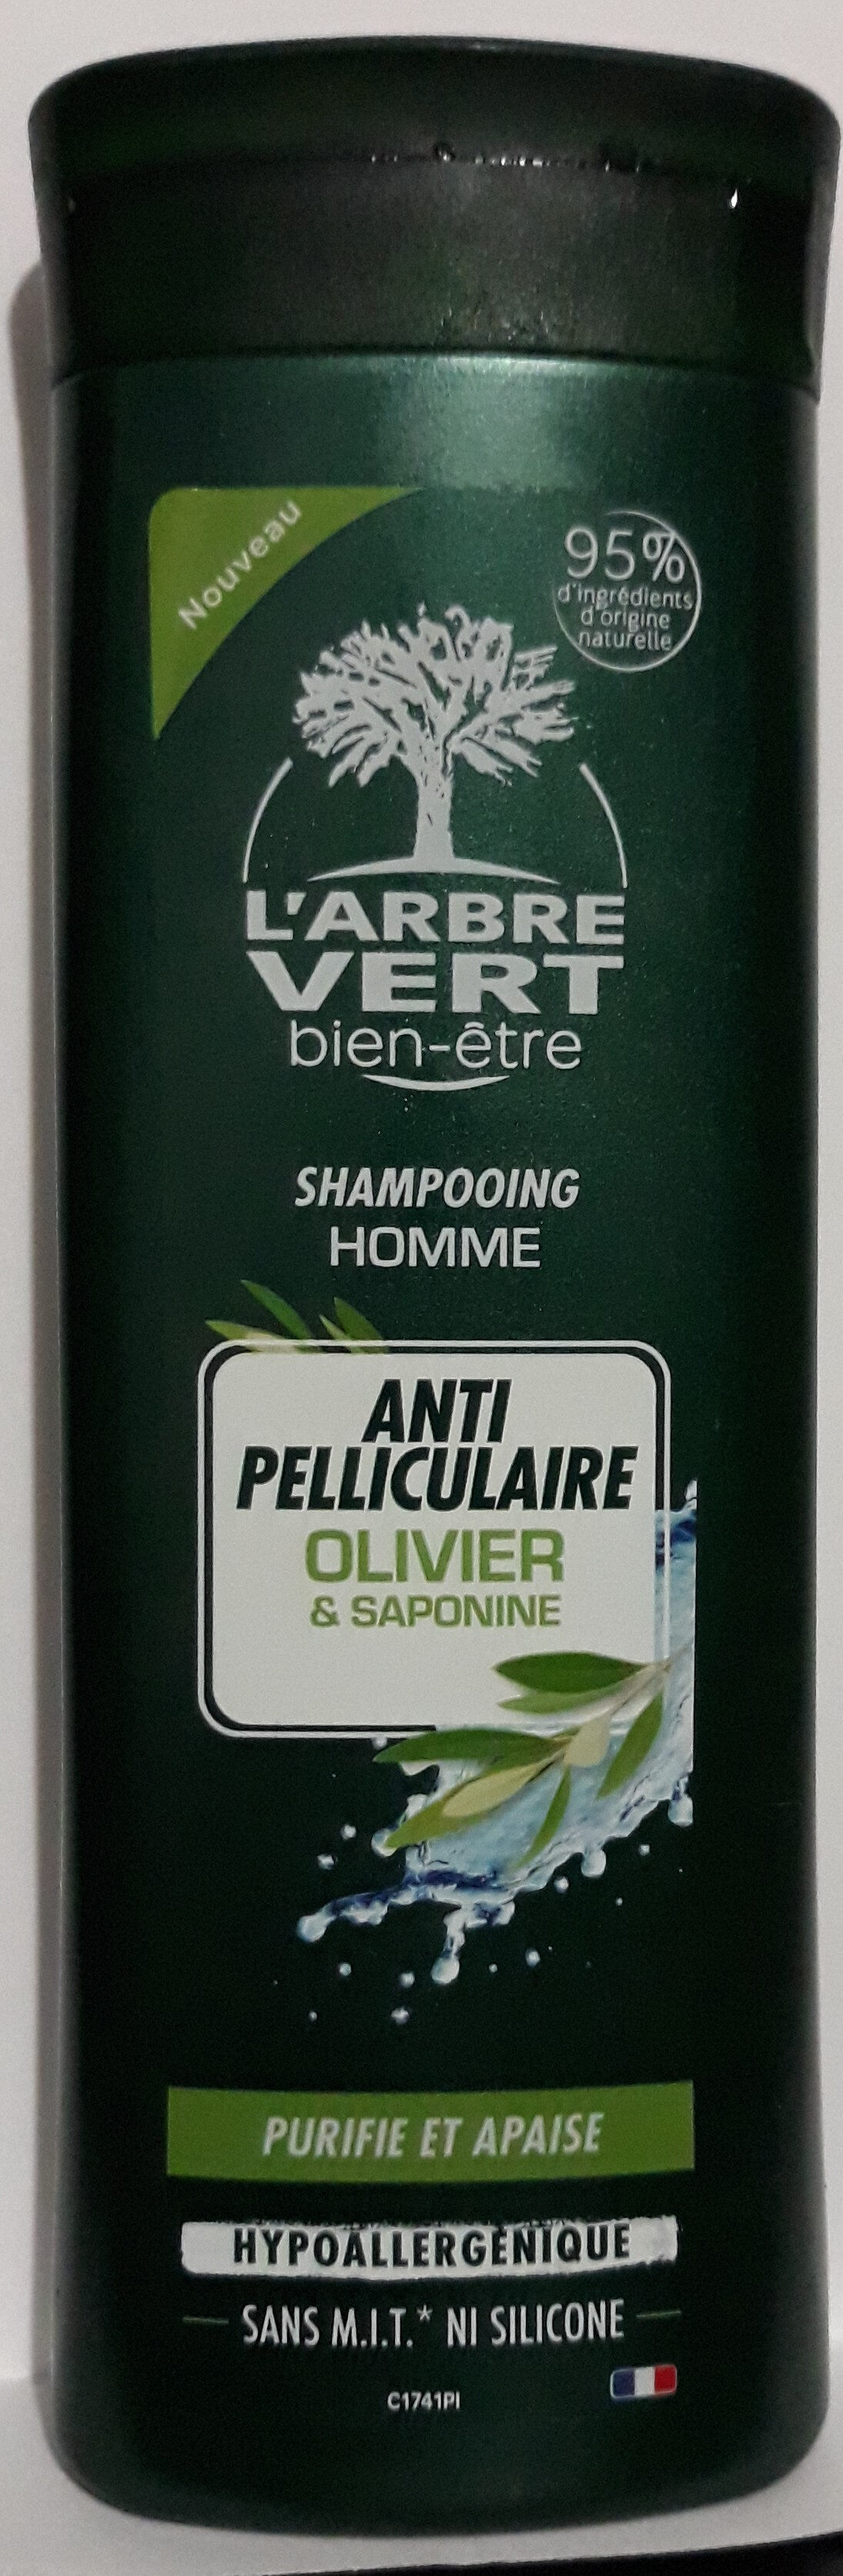 shampooing homme anti pelliculaire olivier & saponine - Produit - fr